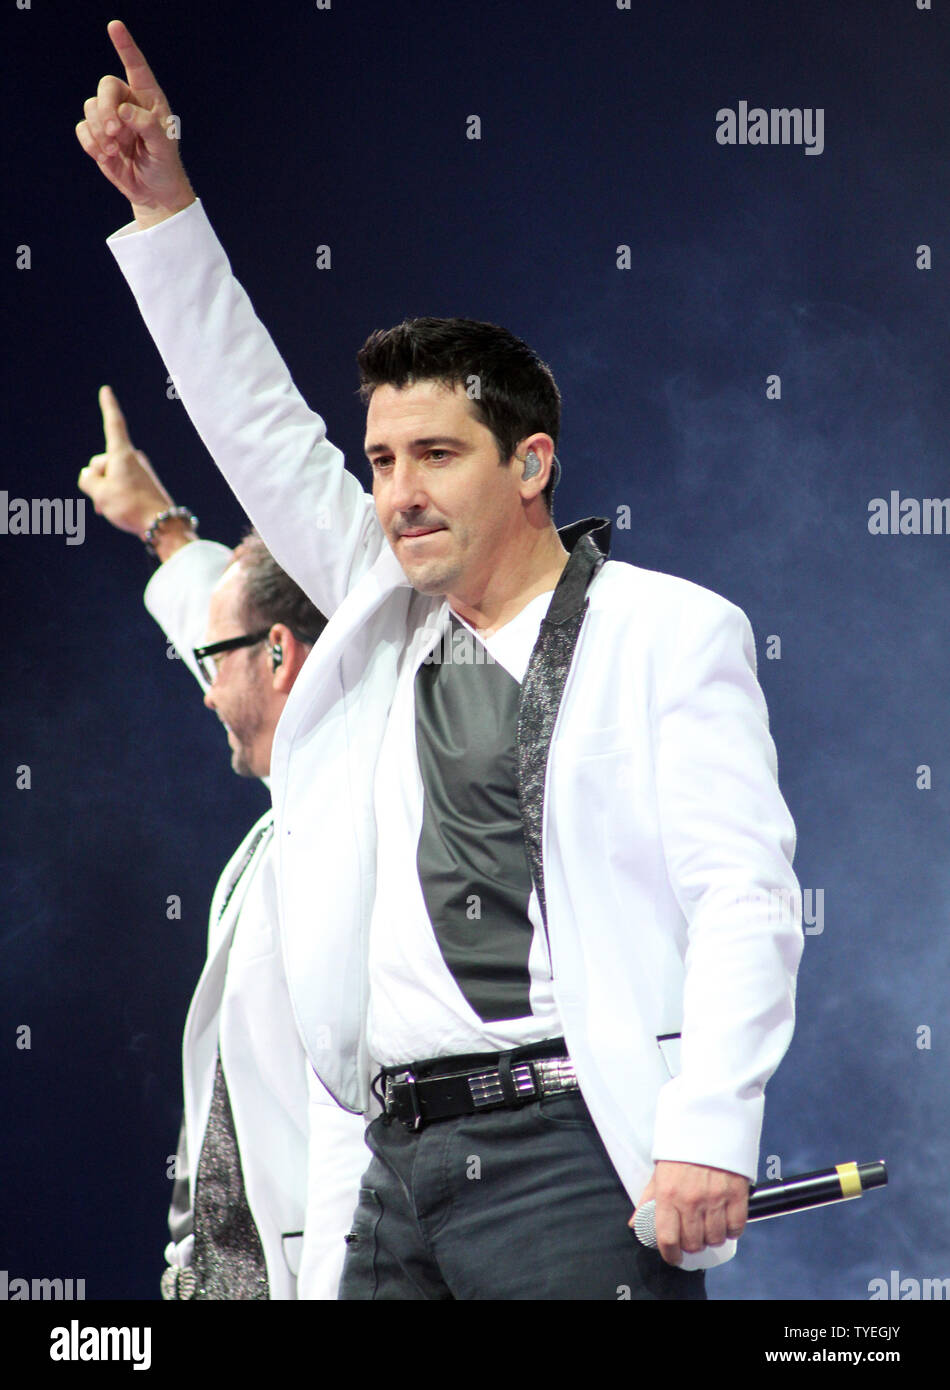 Jonathan Knight with New Kids on the Block performs in concert at the BB & T Center in Sunrise, Florida on June 22, 2013.  UPI/Michael Bush Stock Photo